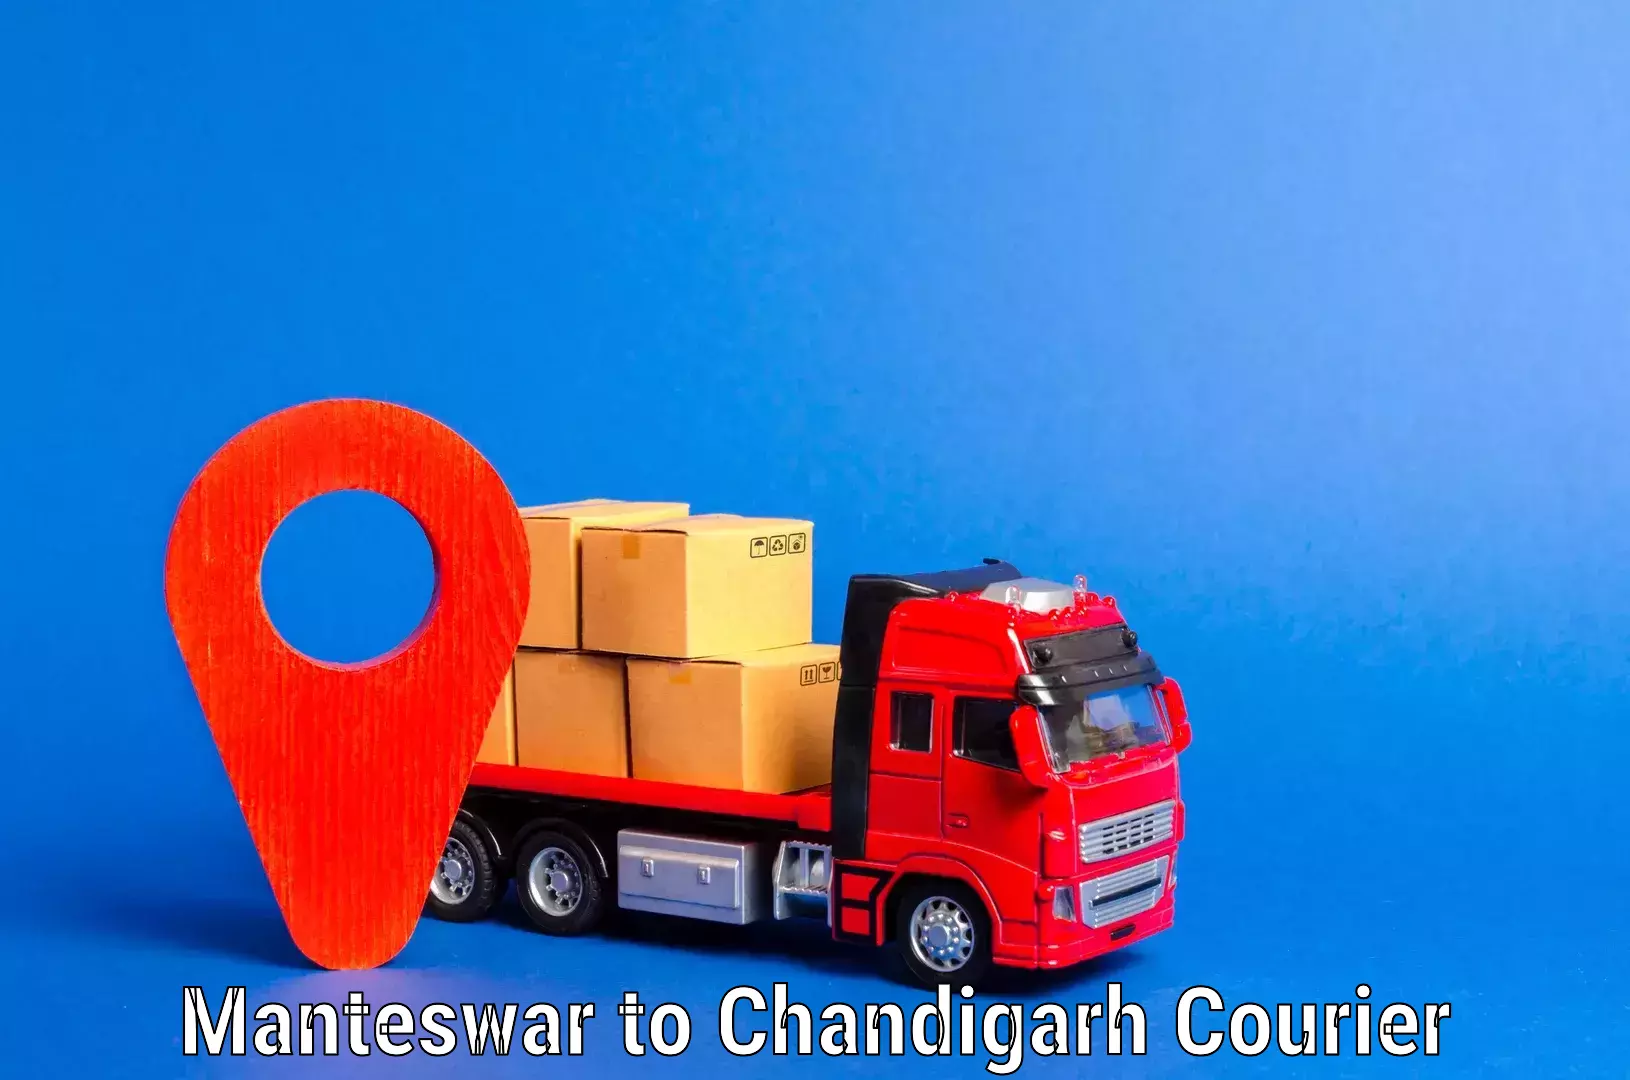 Home relocation experts Manteswar to Chandigarh